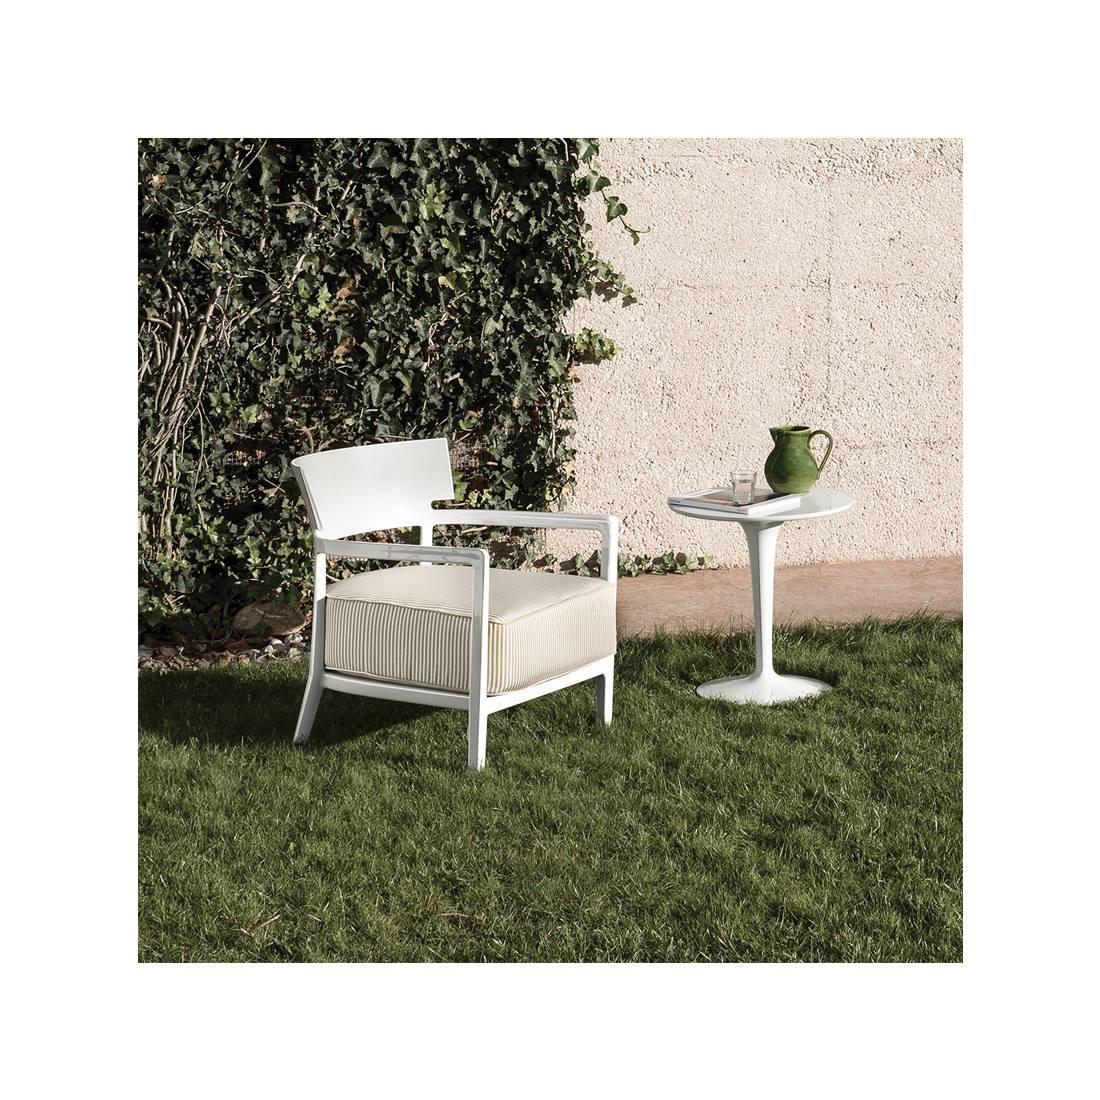 philippe starck outdoor chairs